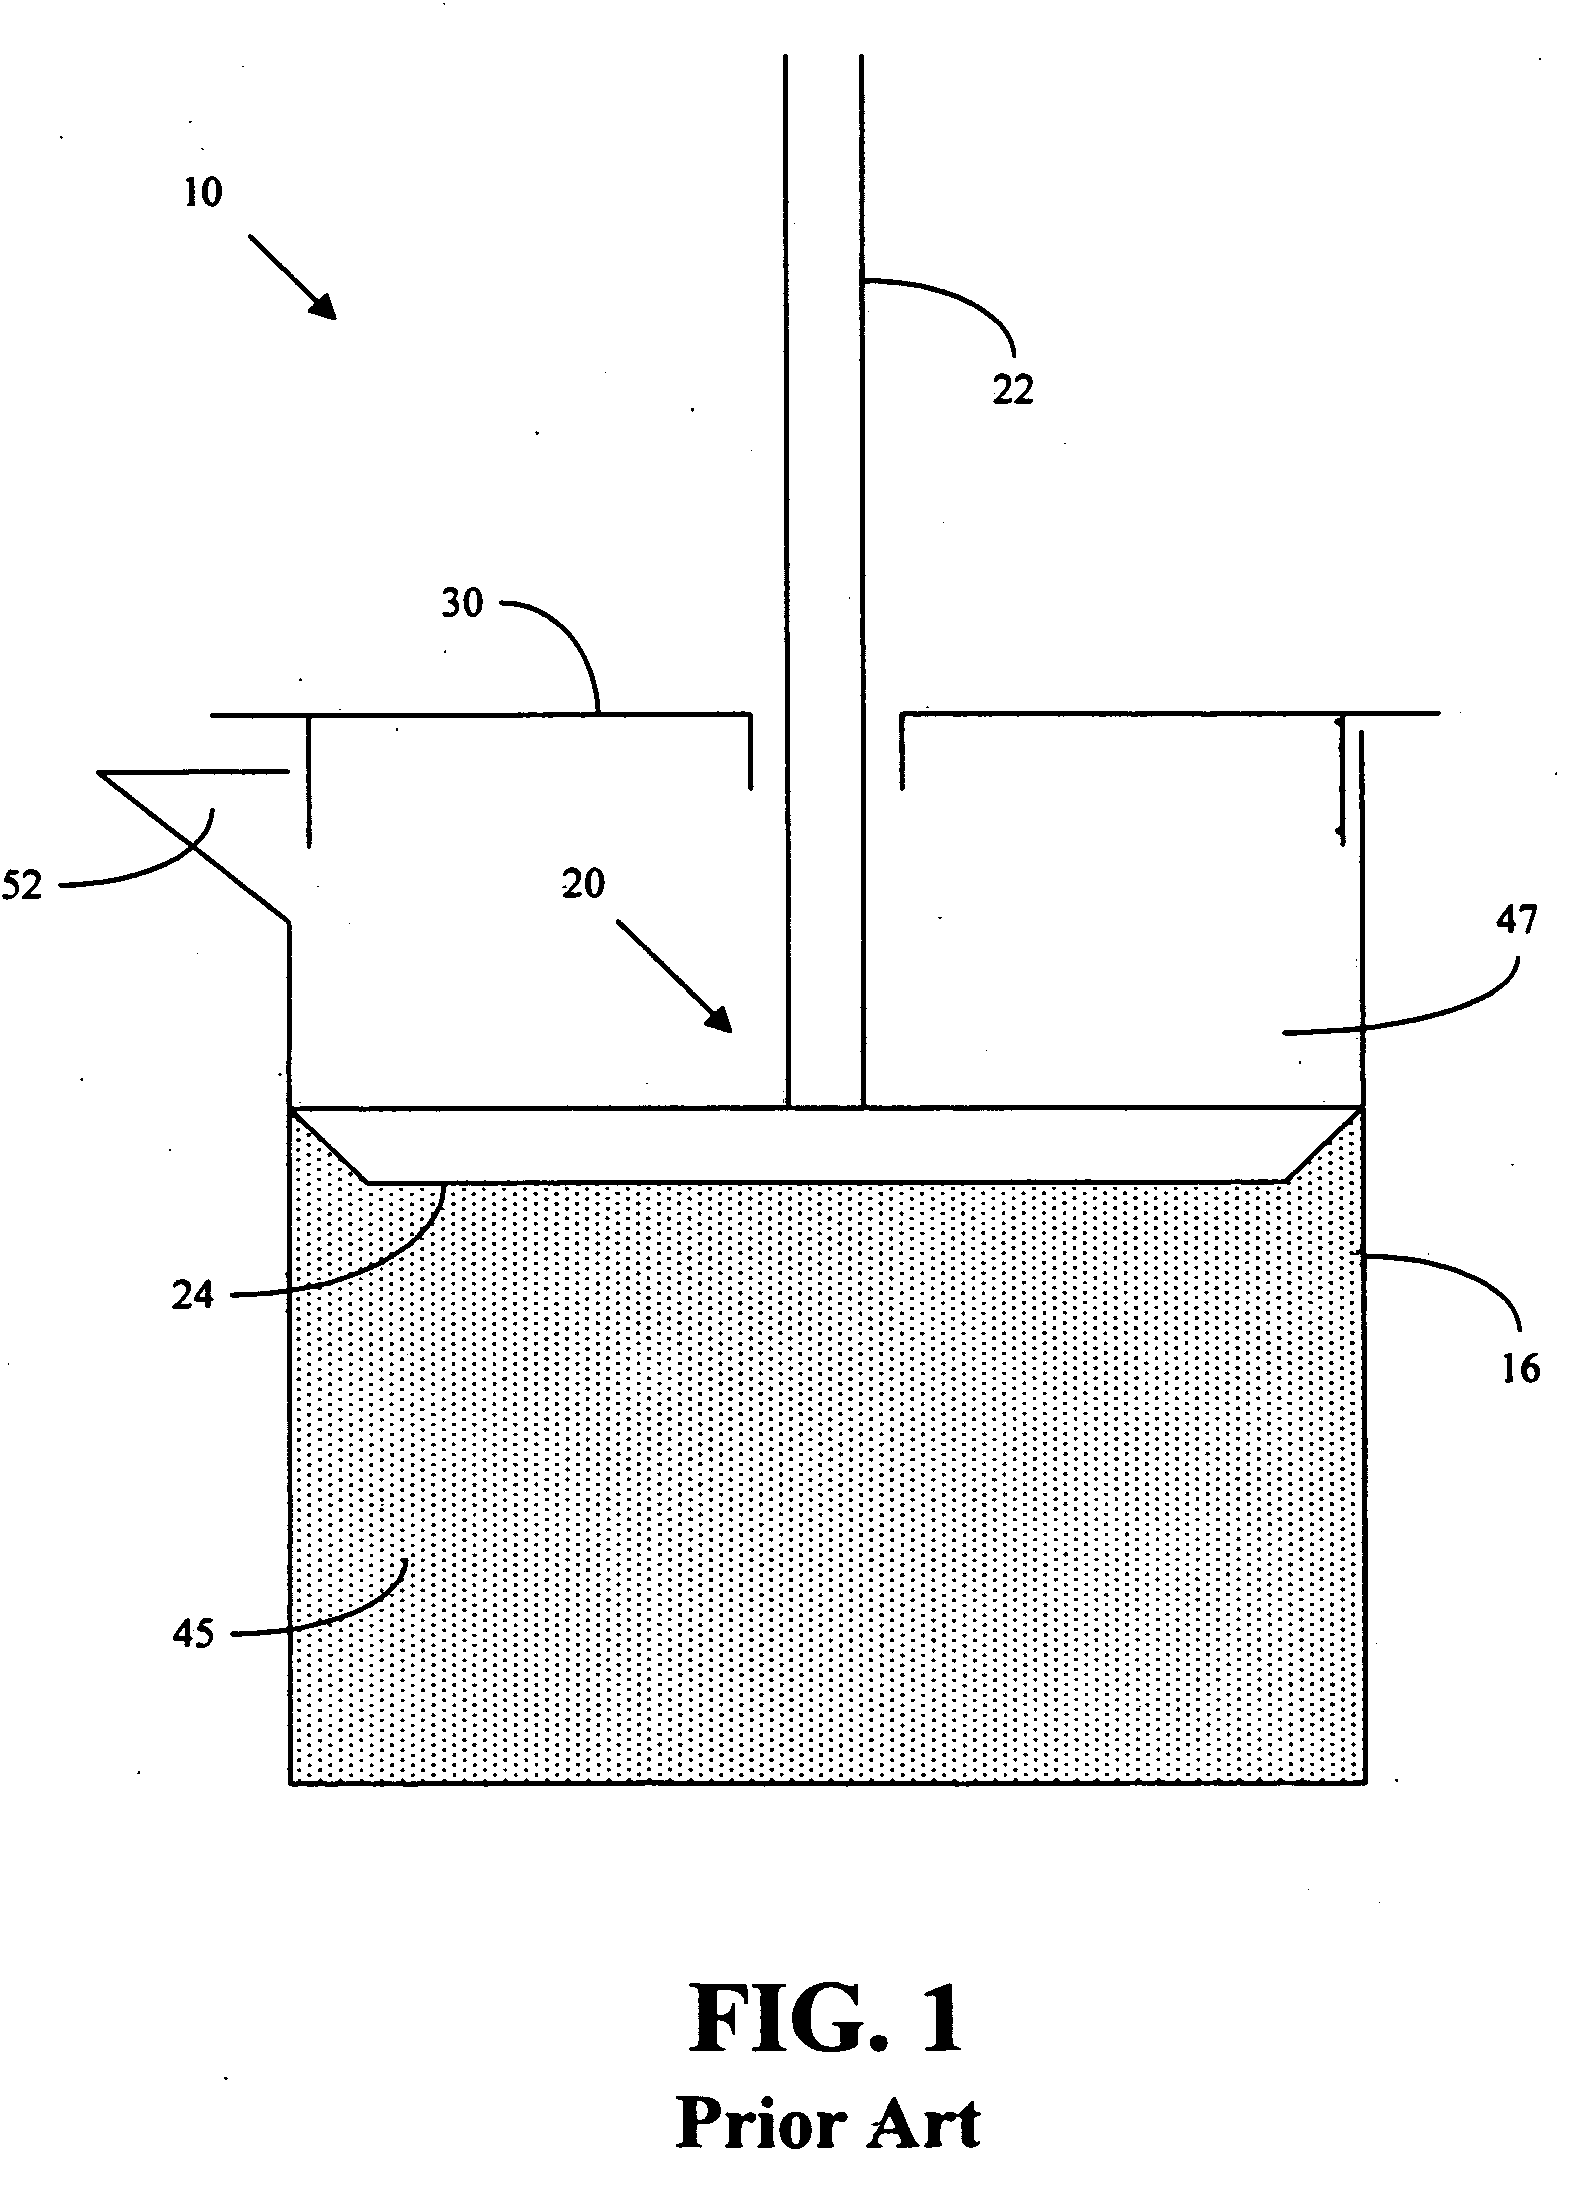 Beverage making devices and methods with an inner housing in place of a central rod plunger